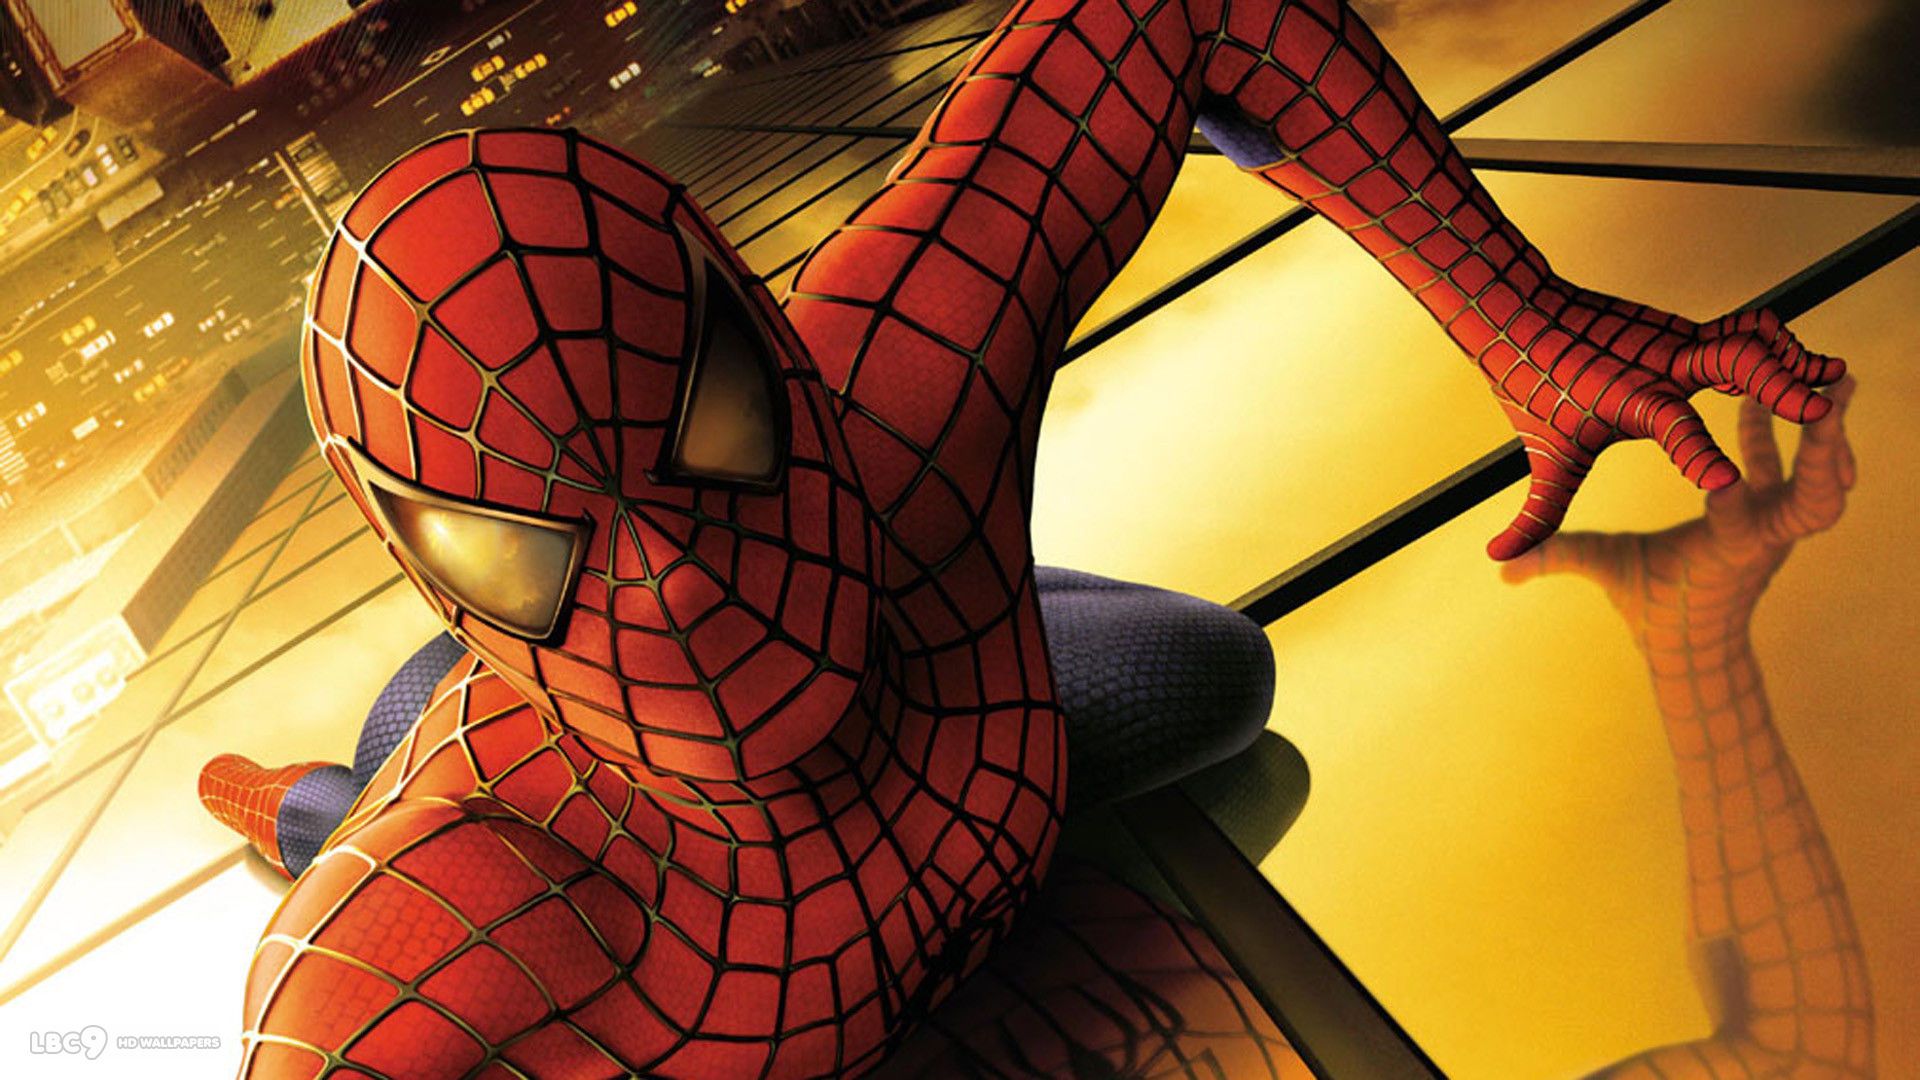 Spider man wallpaper 2 / 4 movie hd backgrounds